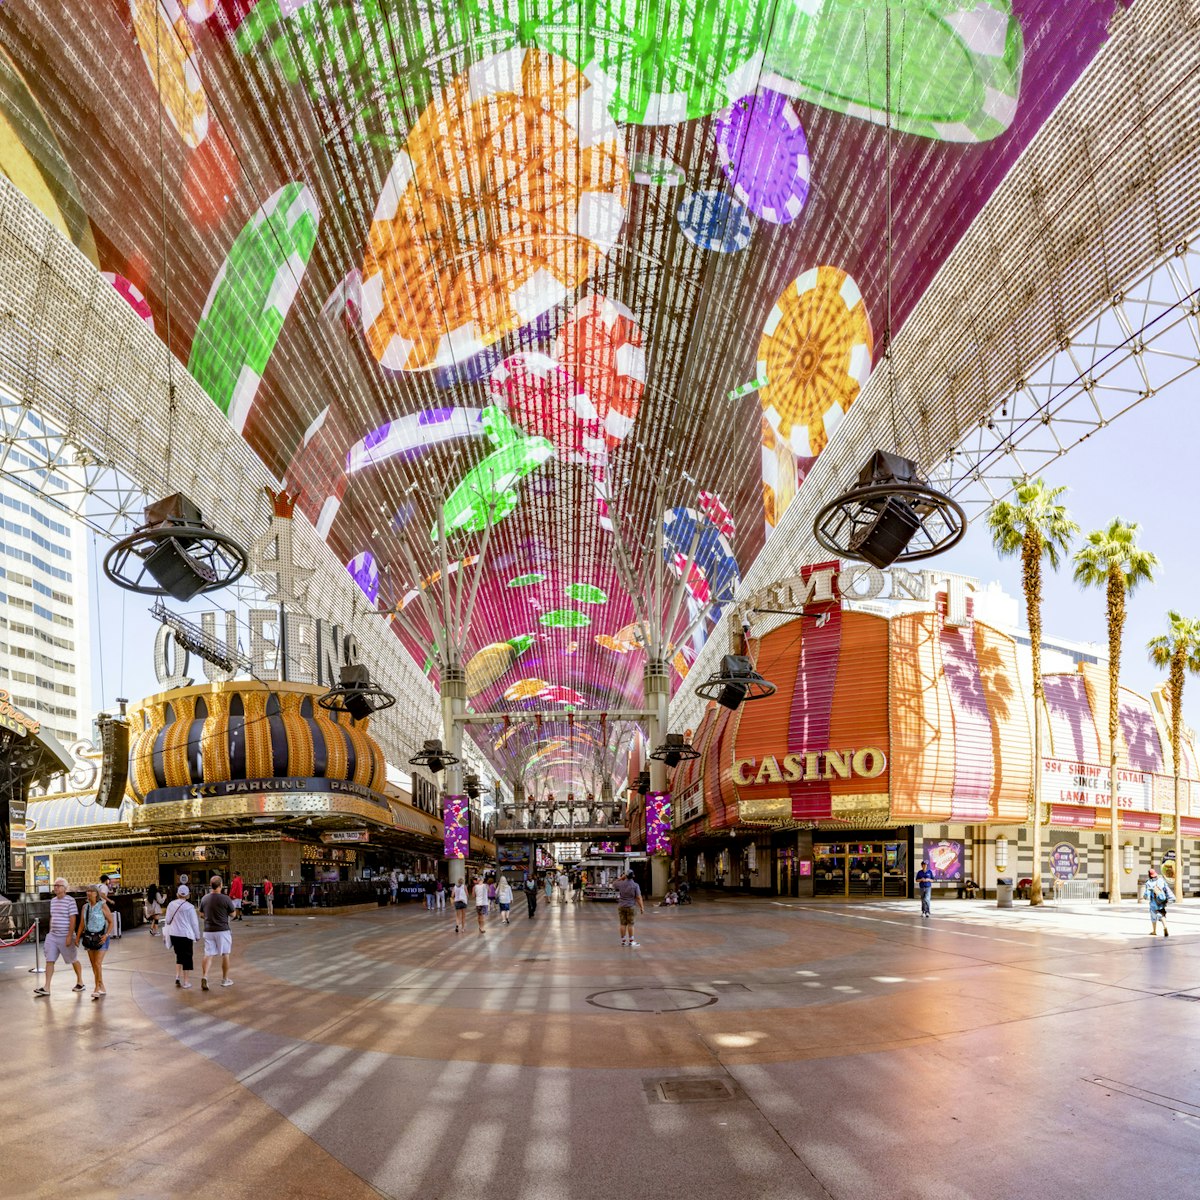 Las Vegas, USA - May 24, 2022: Hustle and bustle of crowds during the day on the famous Fremont Street in the heart of downtown Las Vegas with its Casinos, Neon Lights and Street Entertainment.
1419864963